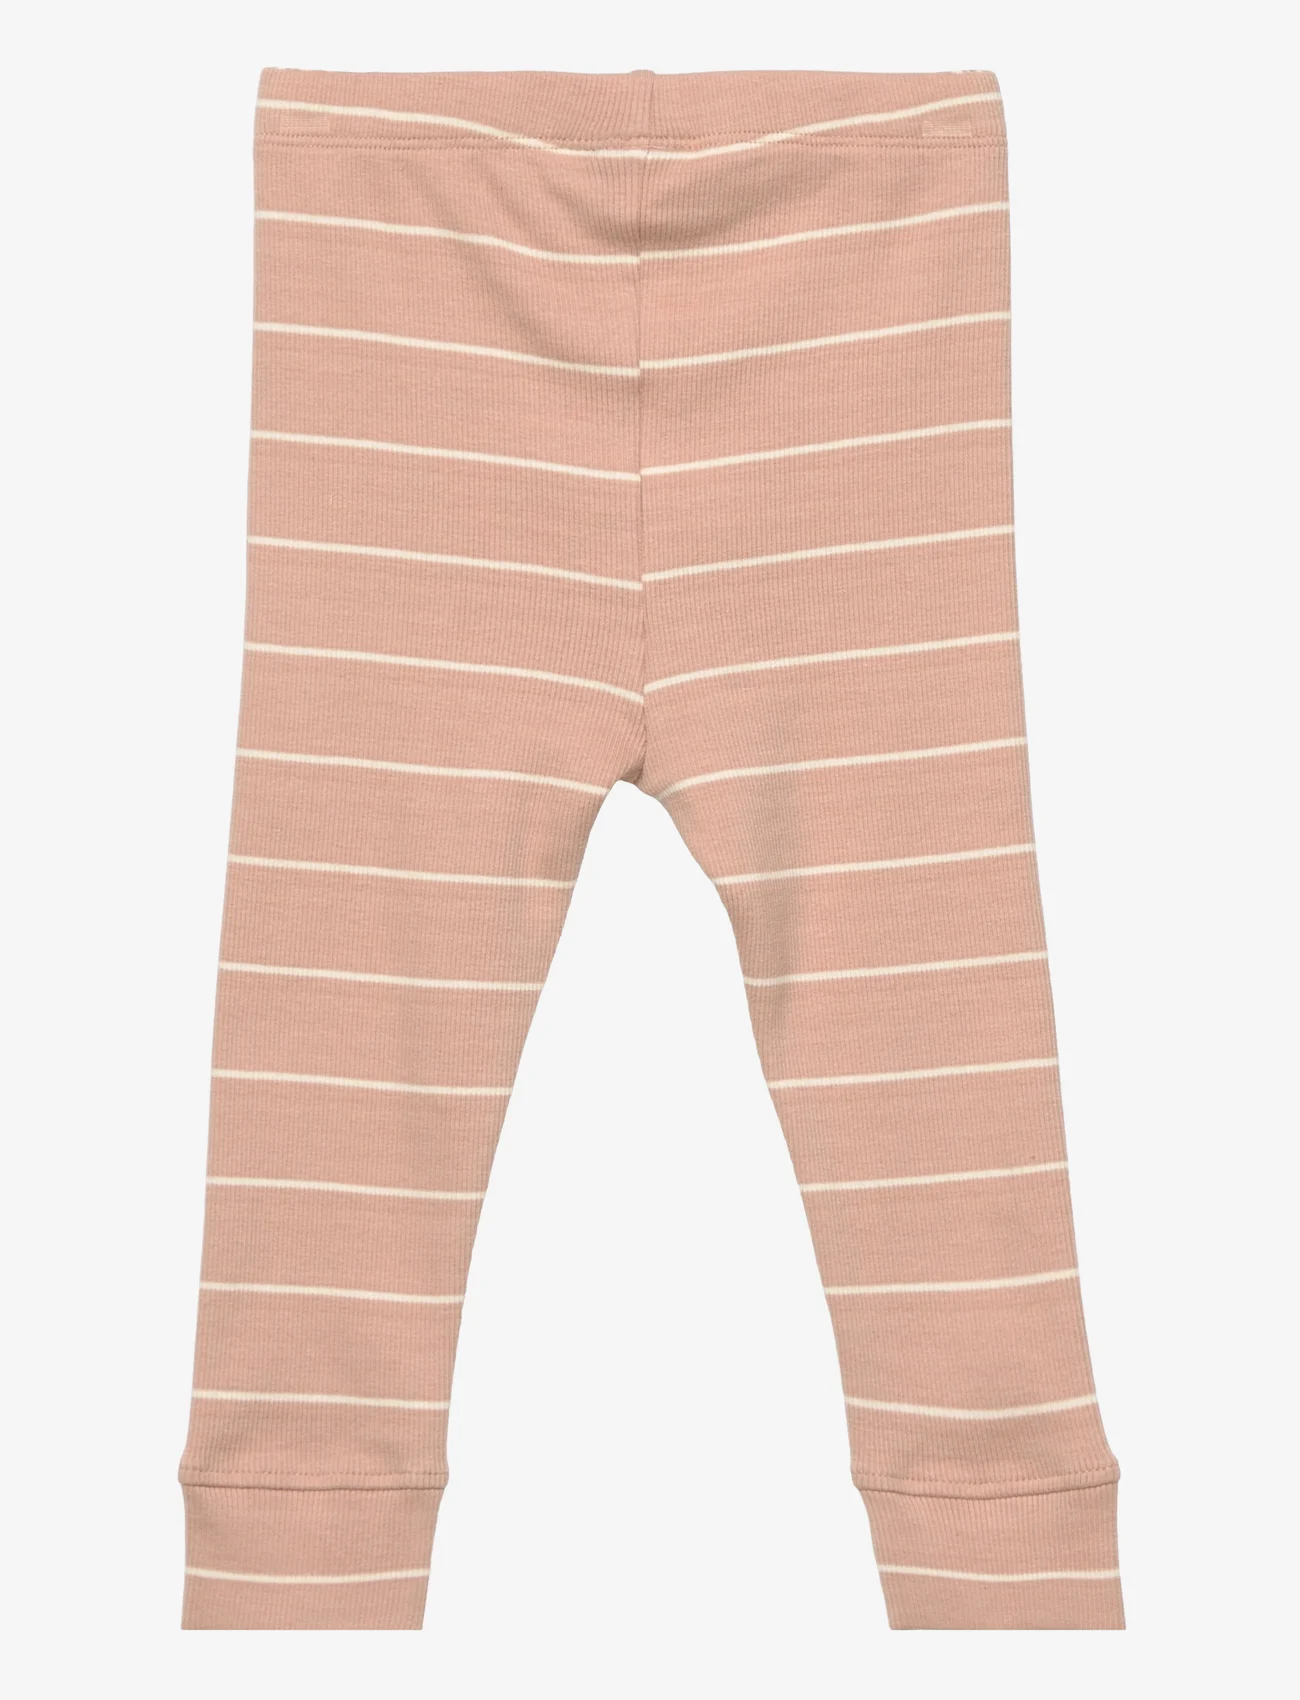 Sofie Schnoor Baby and Kids - Leggings - lowest prices - nougat - 1